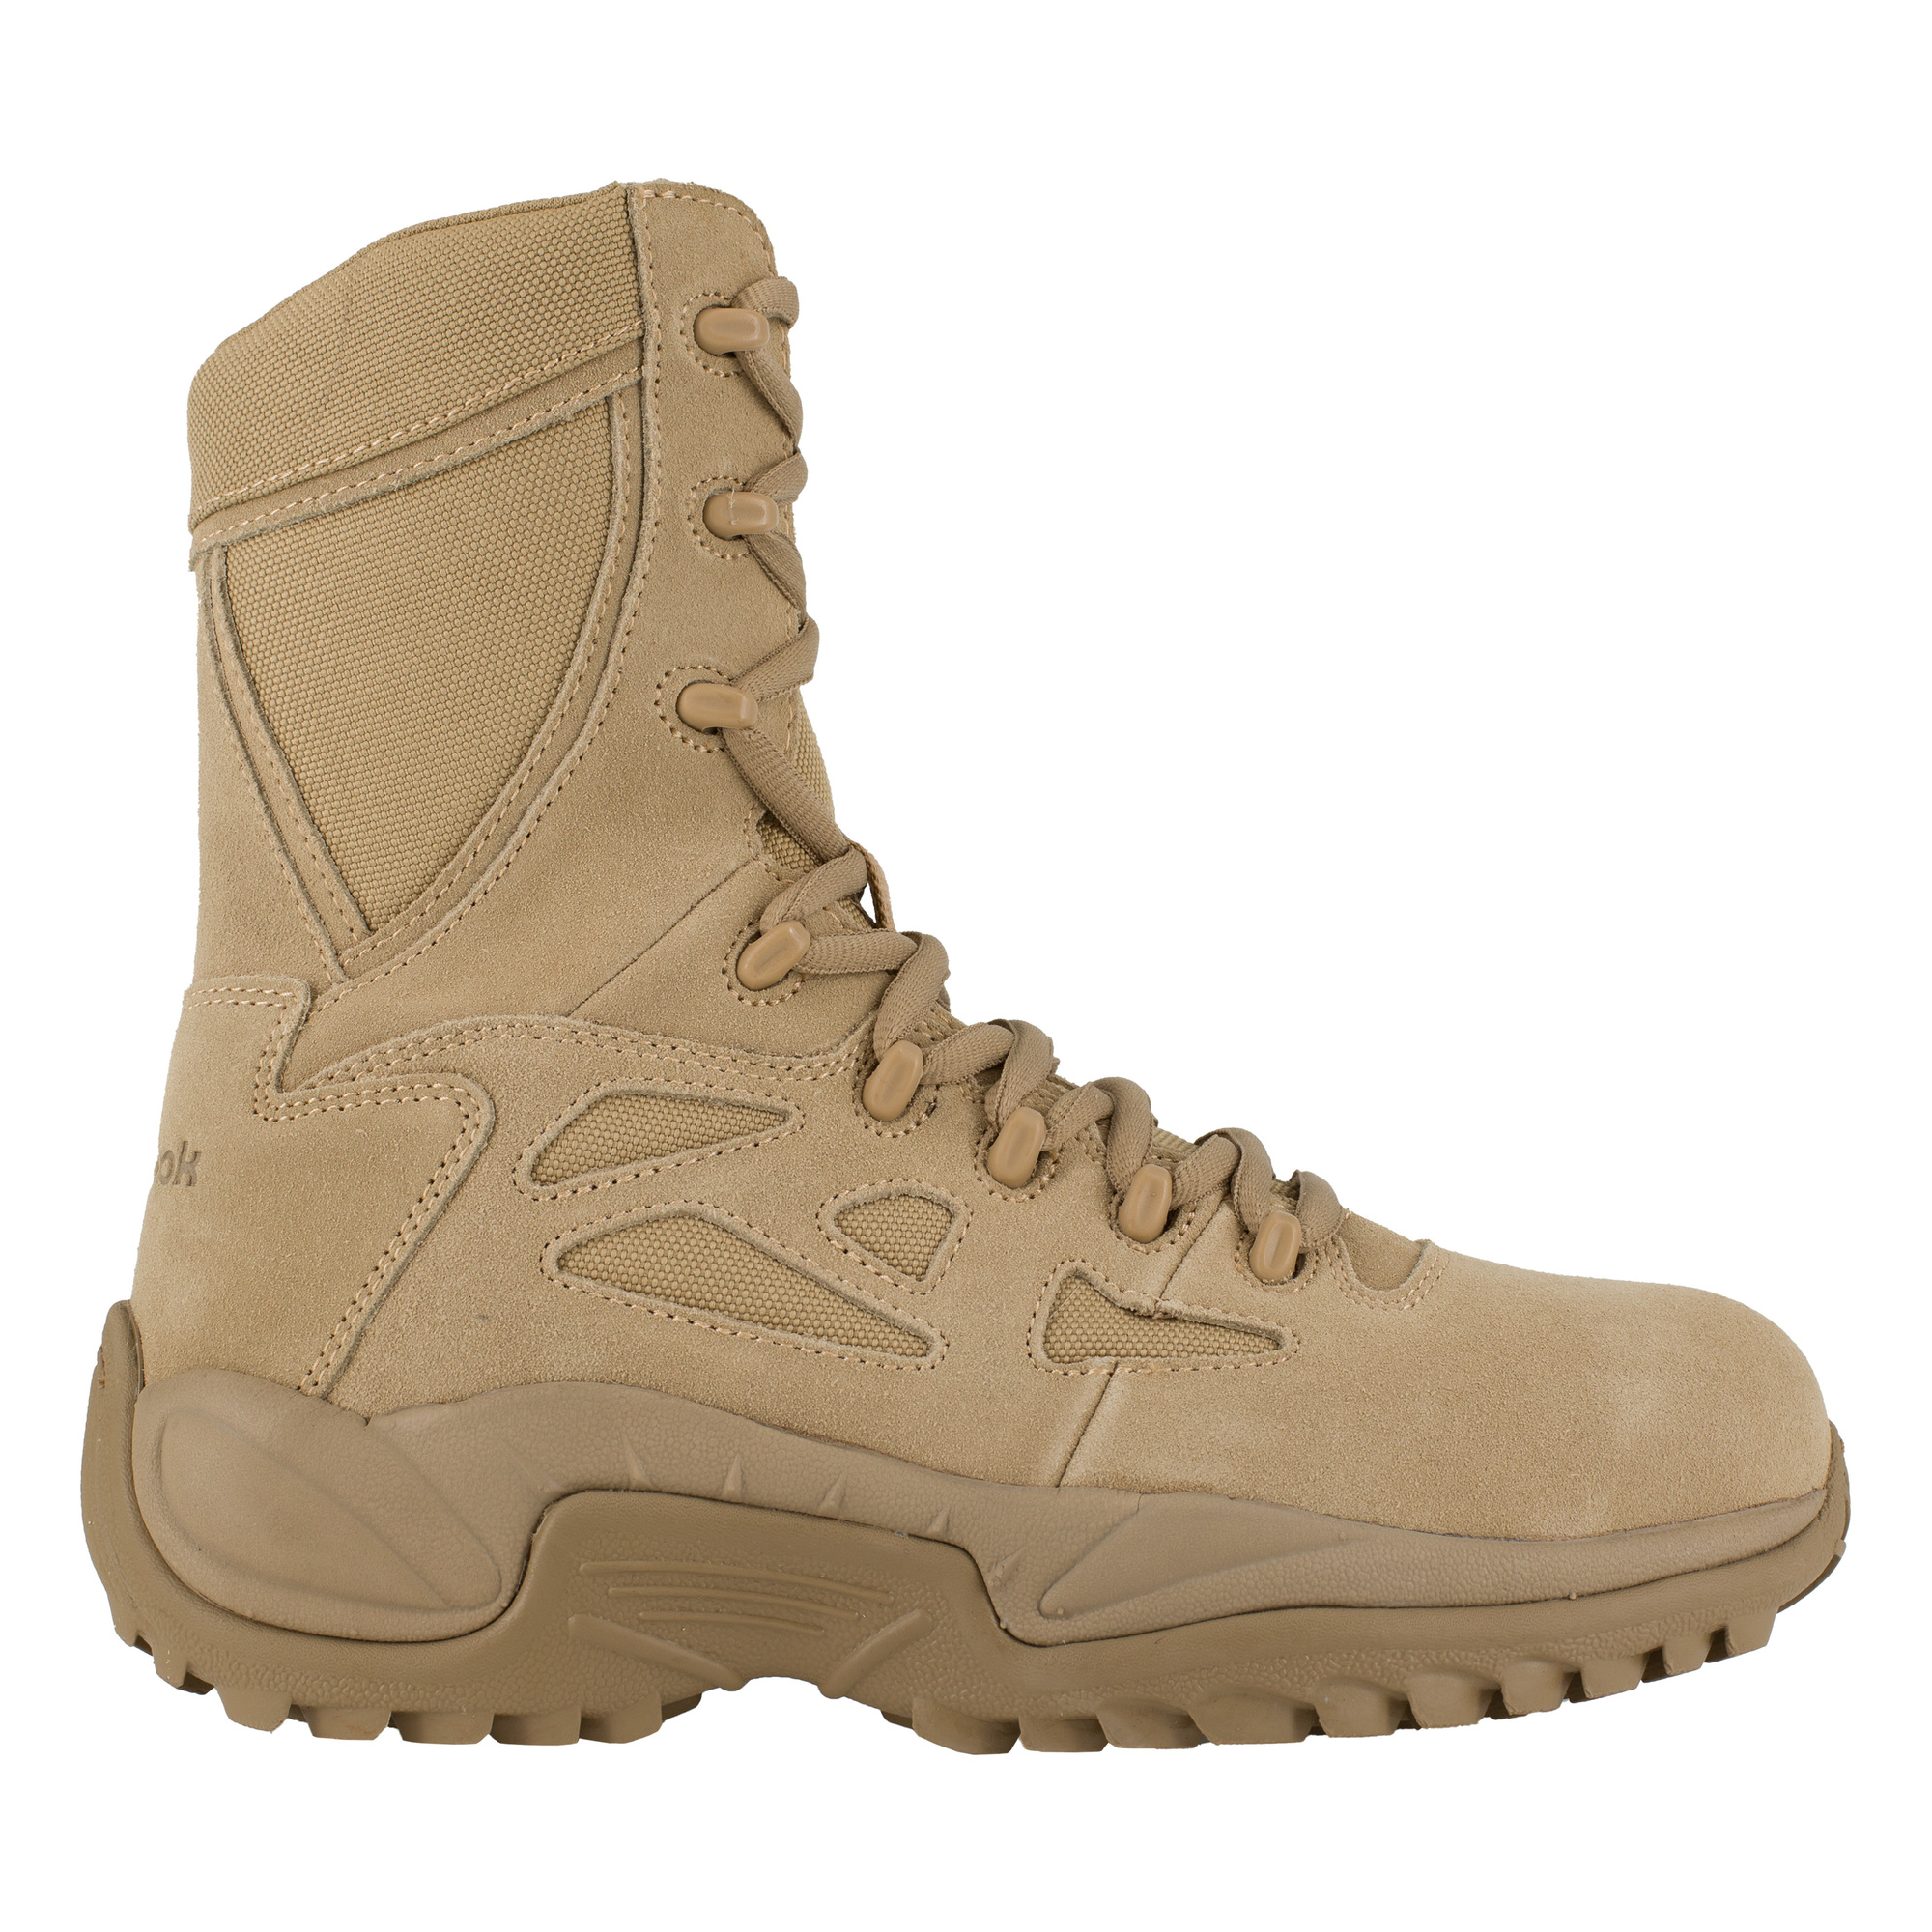 Reebok, 8Inch Stealth Tactical Boot with Side Zipper, Size 5 1/2, Width Medium, Color Desert Tan, Model RB894 -  RB894-M-05.5